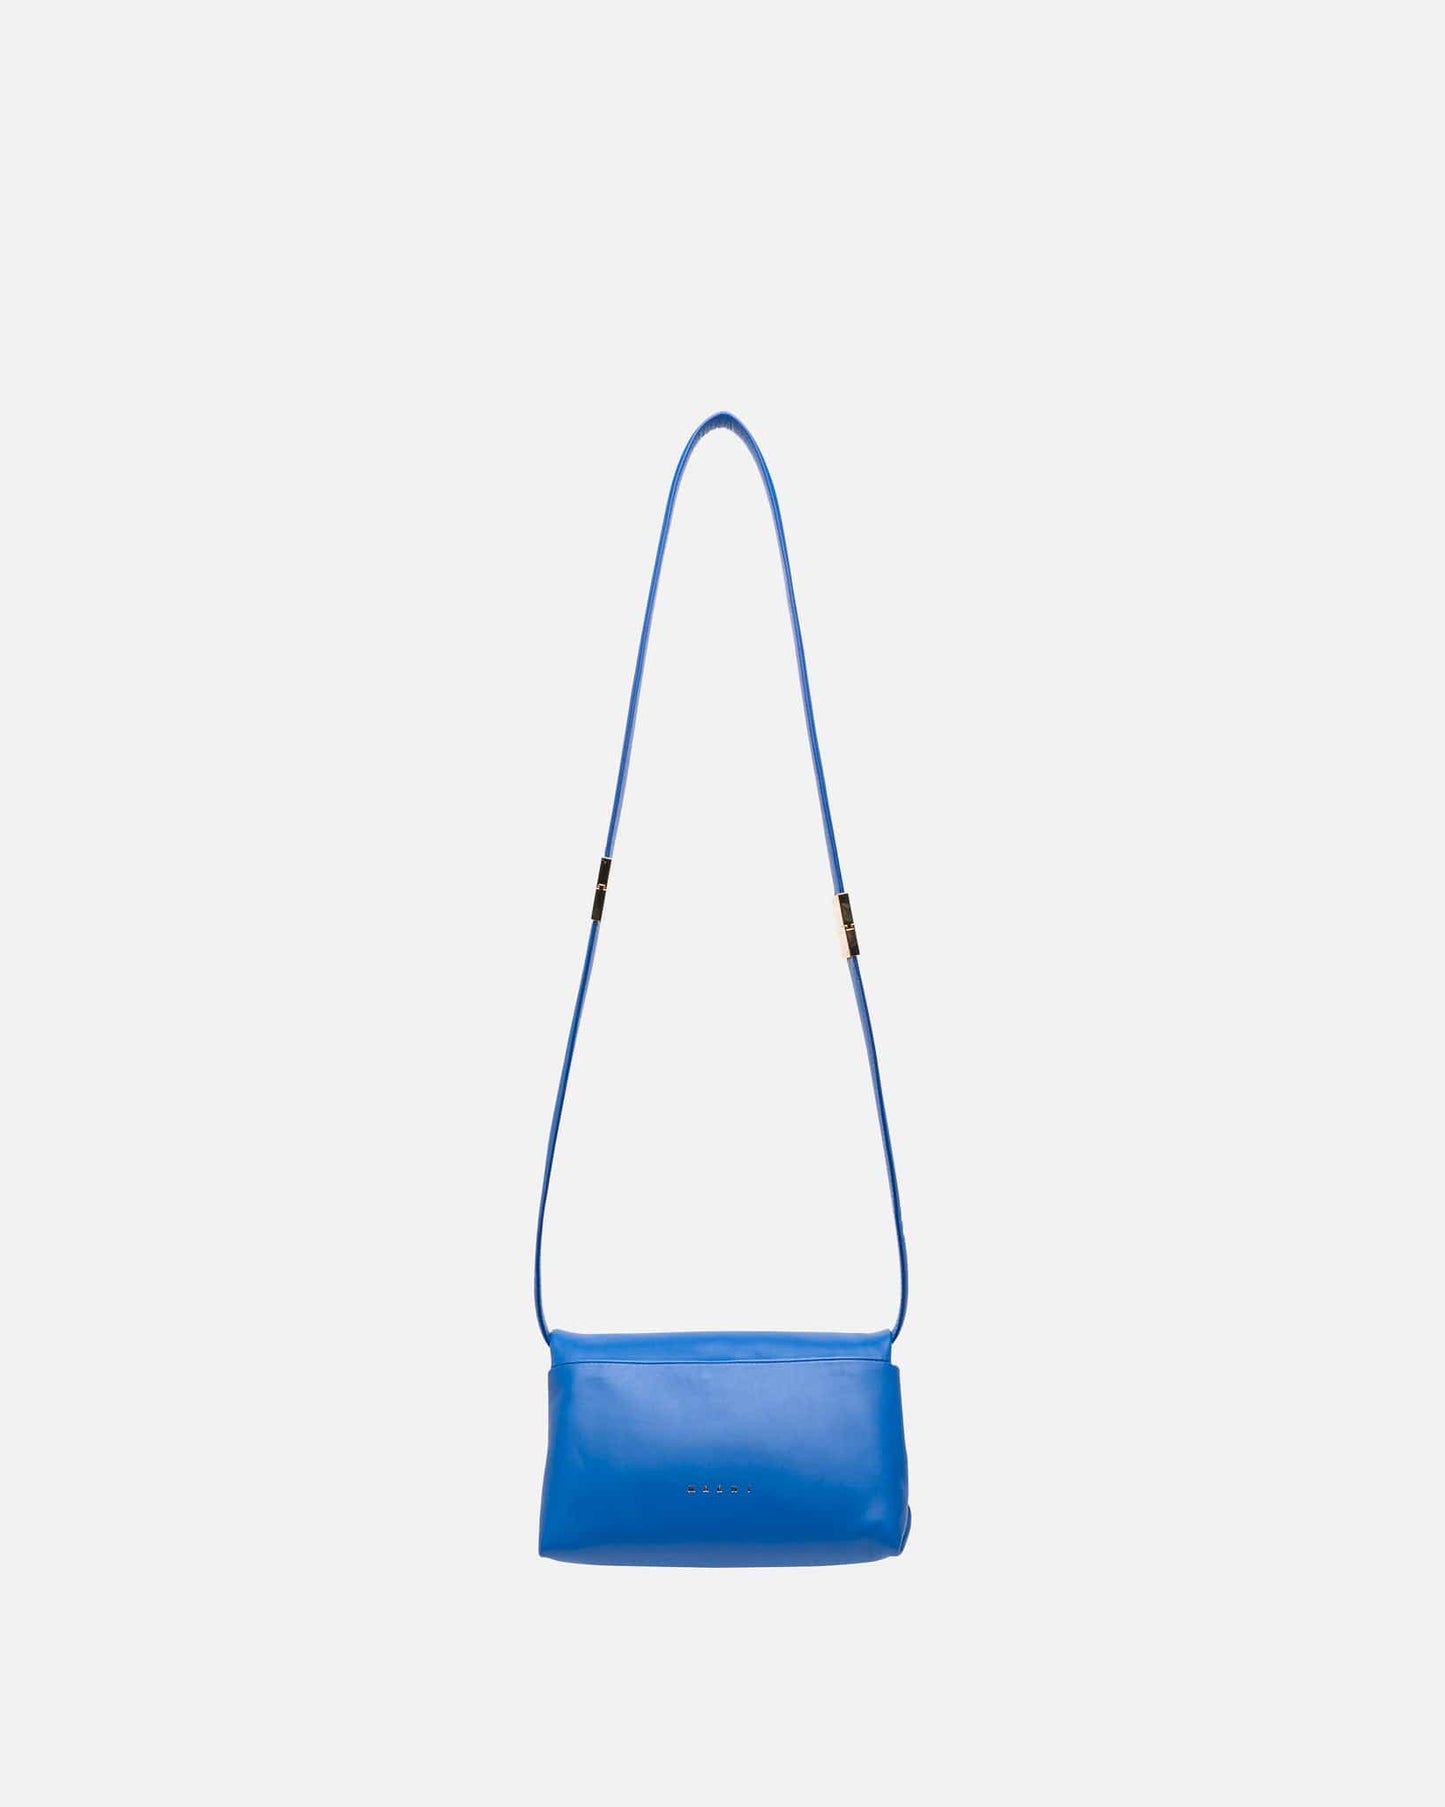 Marni Women Bags Small Prism Bag in Astra Blue